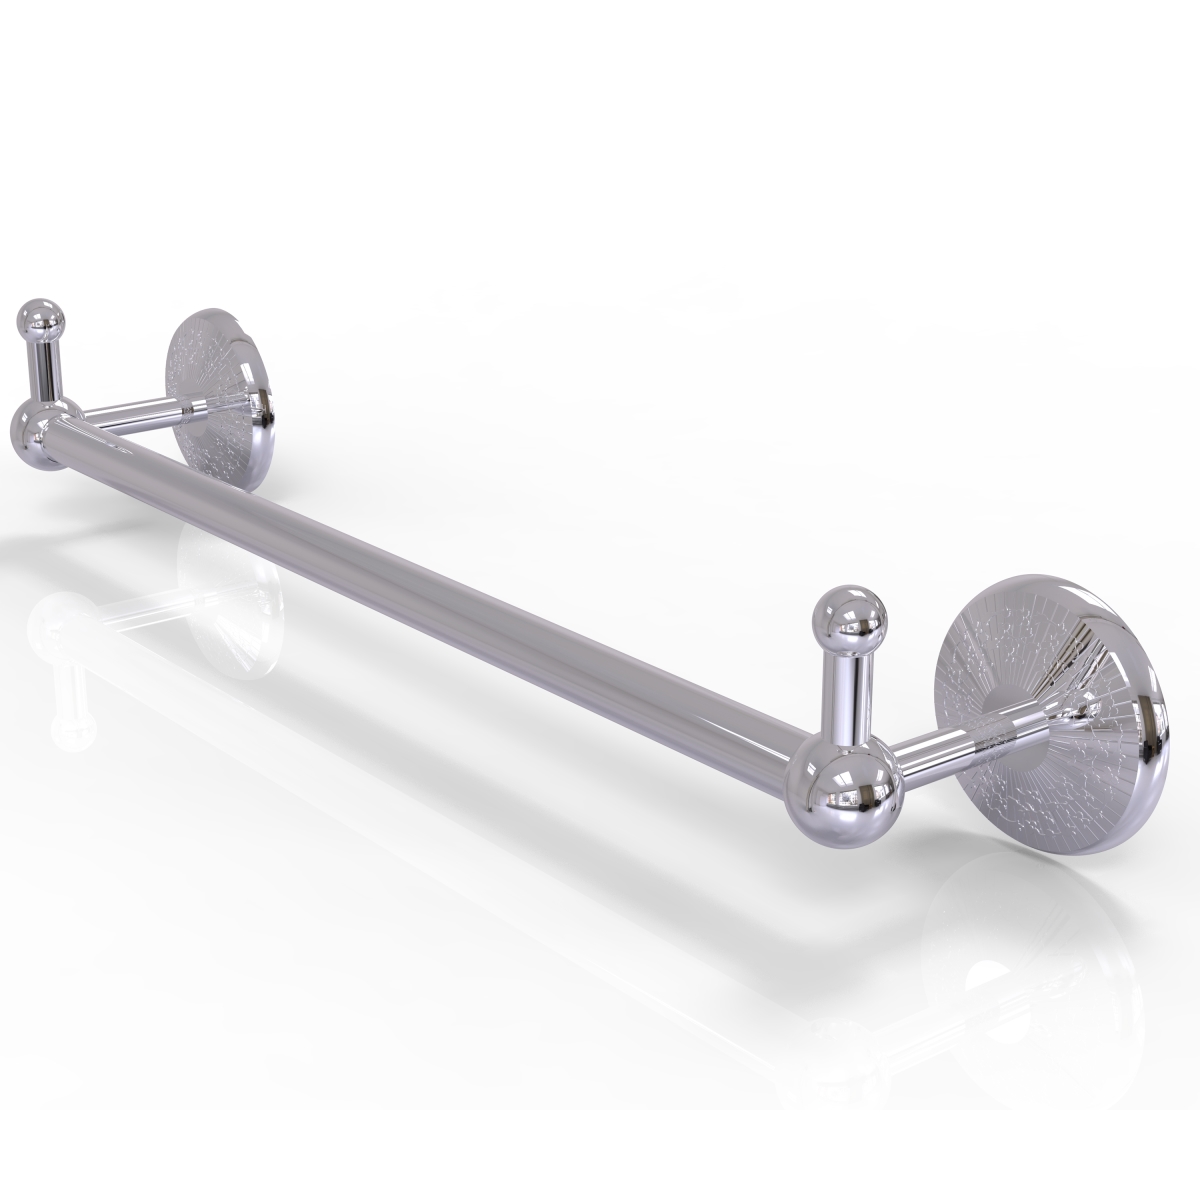 Allied Brass PMC-41-24-PEG-PC 24 in. Prestige Monte Carlo Collection Towel Bar with Integrated Hooks, Polished Chrome - 3.3 x 3.8 x 26.25 in.